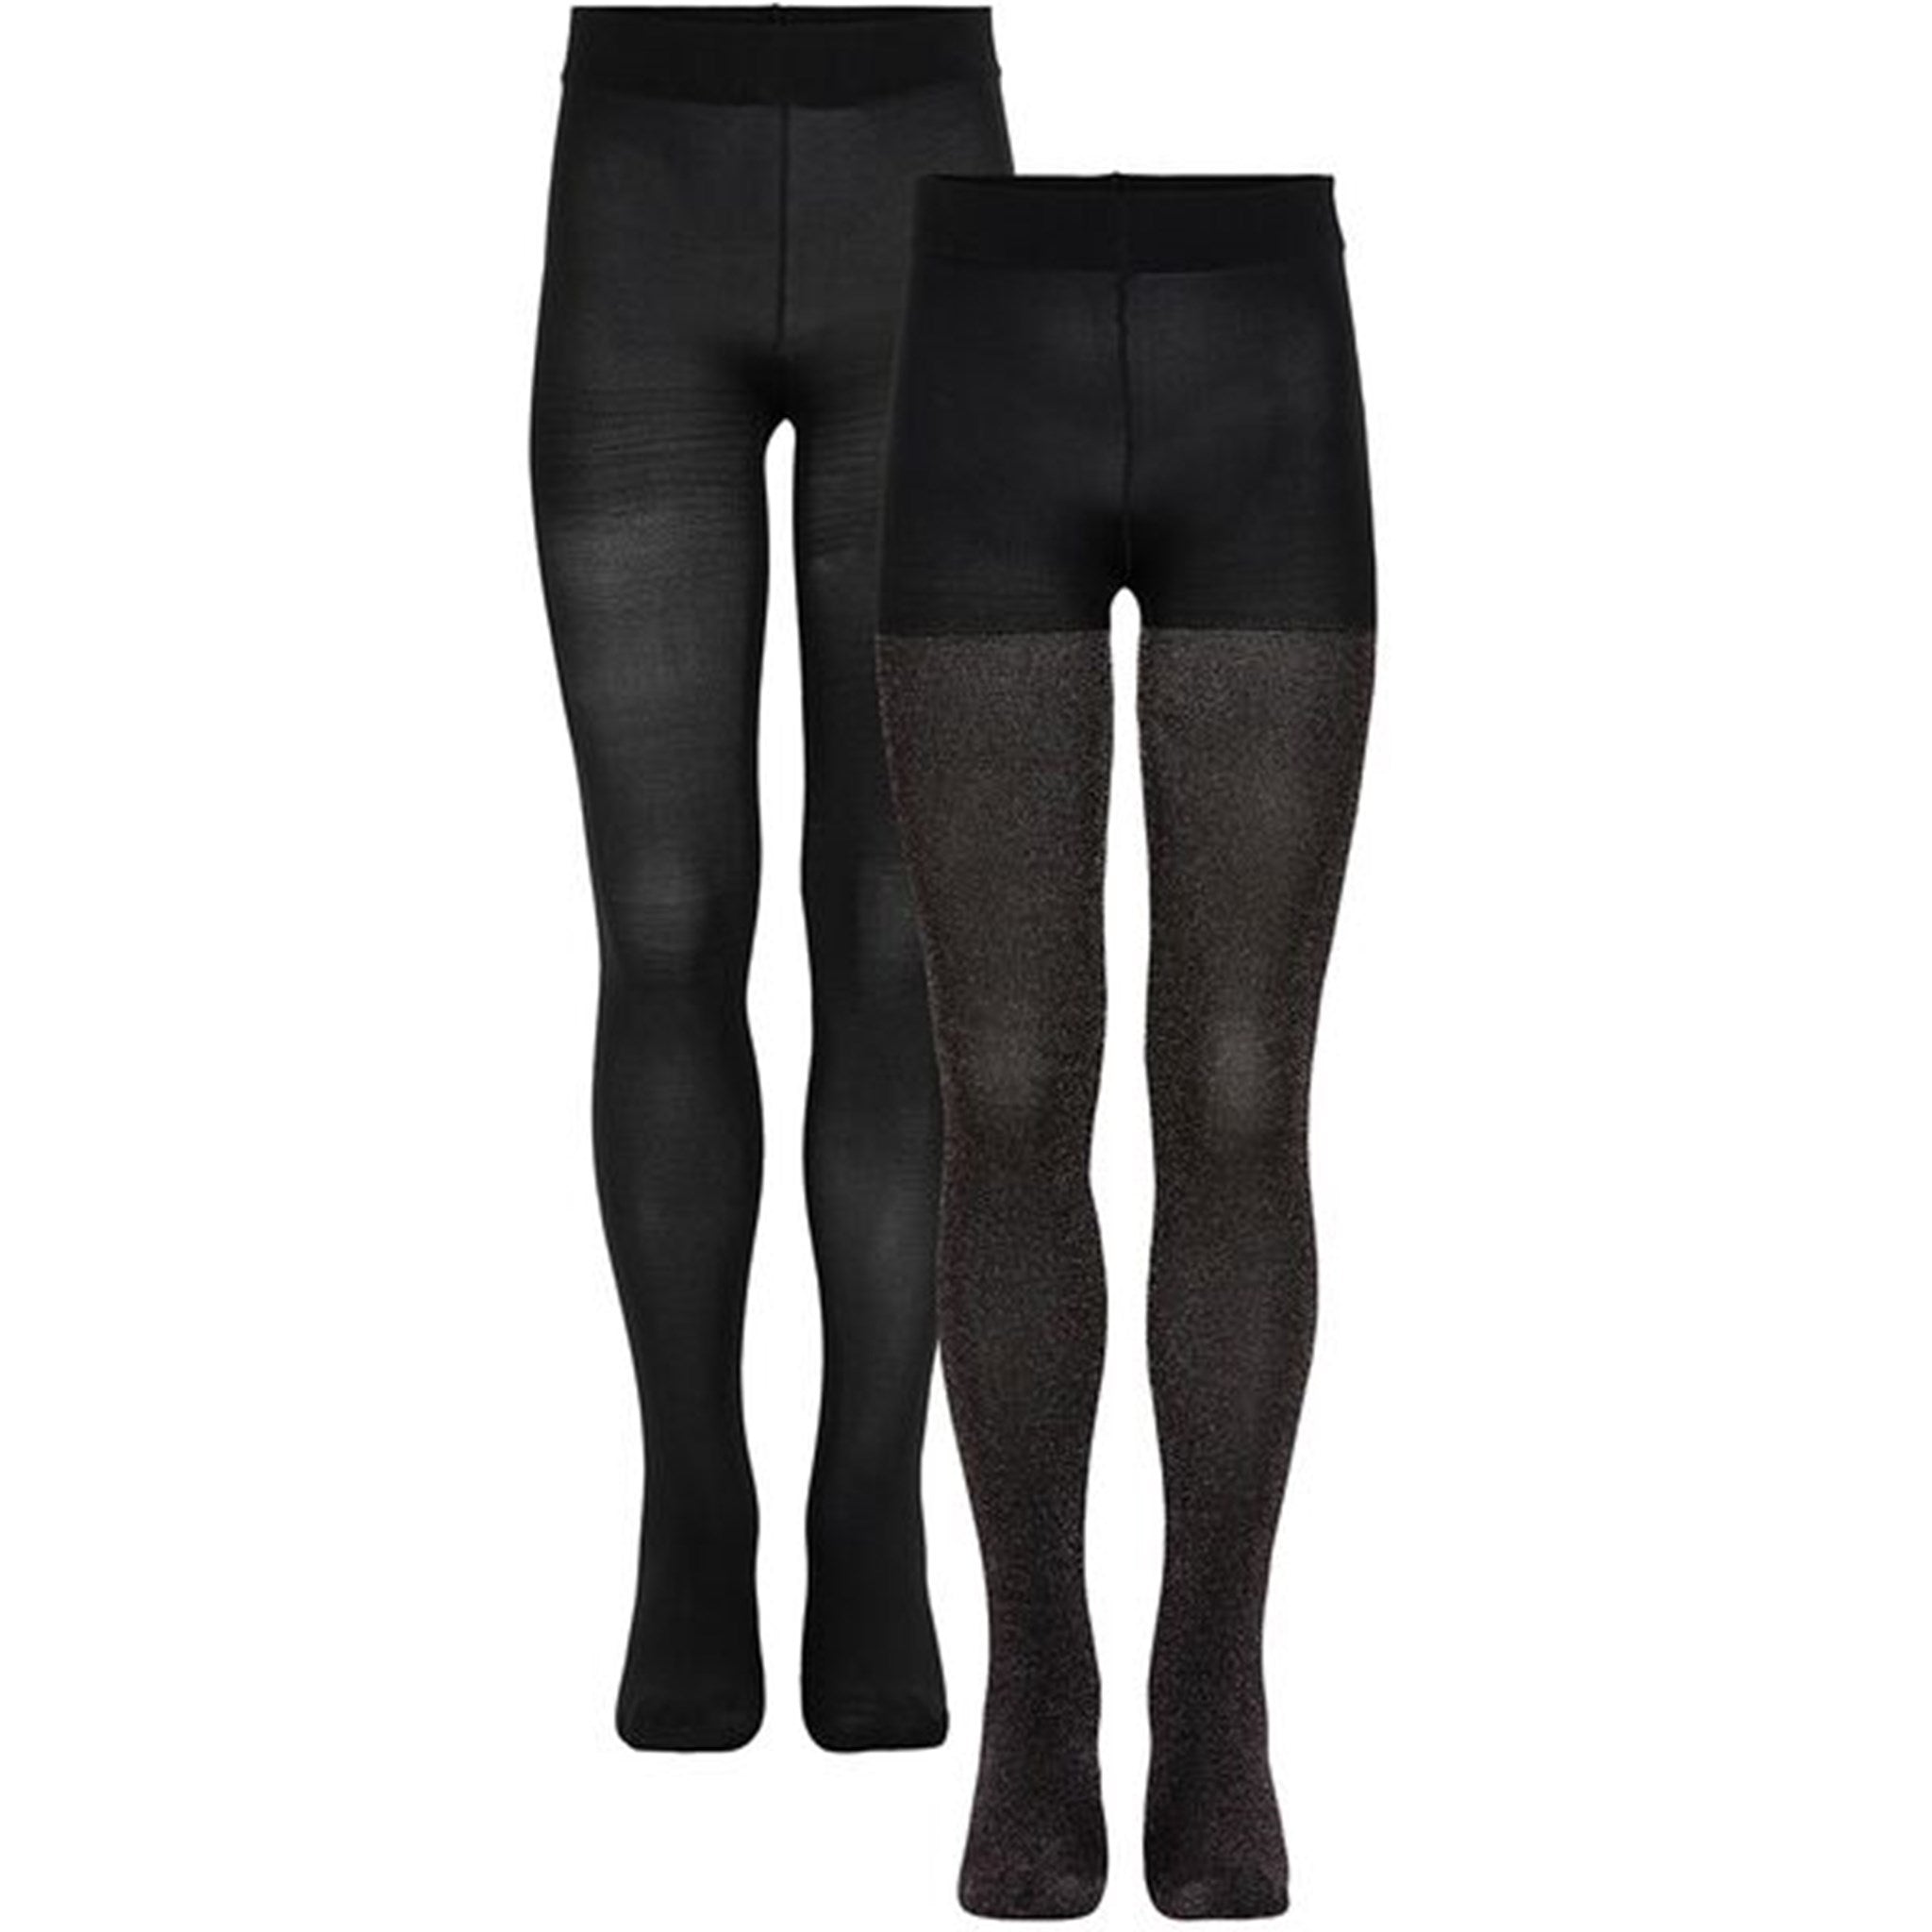 The New 2-pack Tights Multi Glitter / Solid